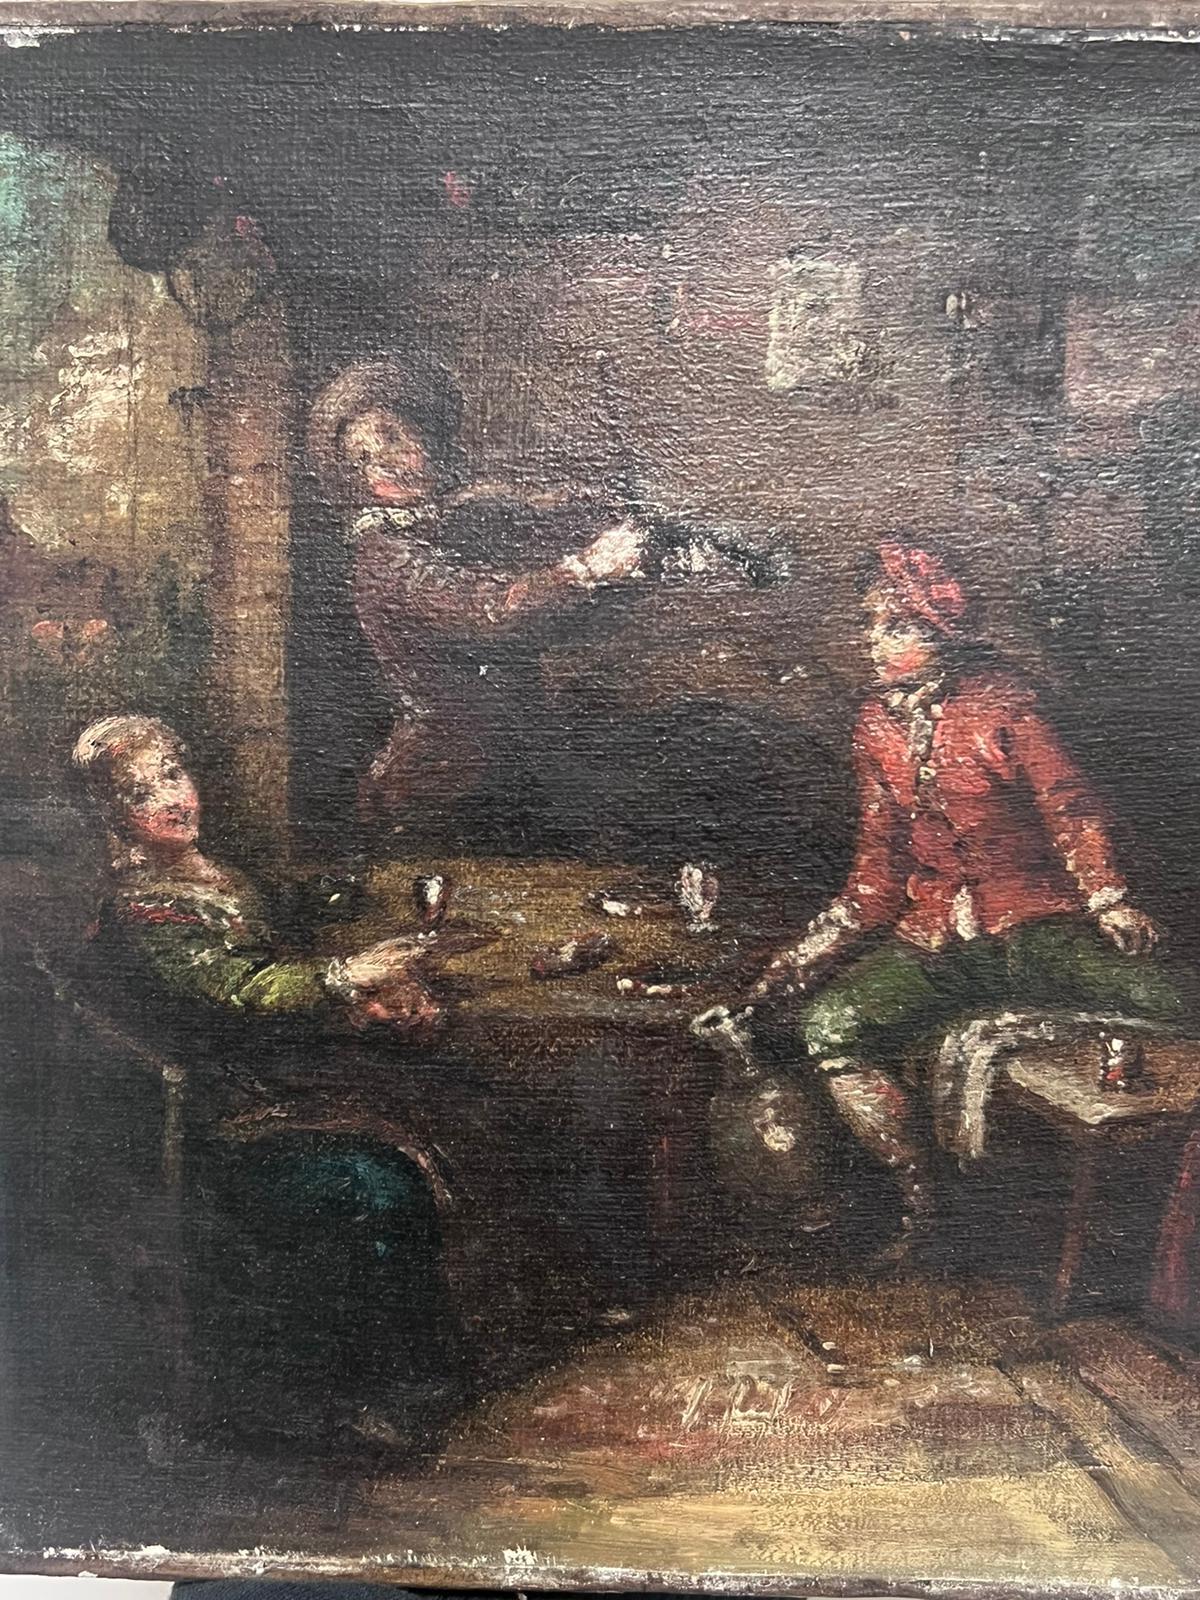 Violin Player in Tavern
18th century French School
oil on canvas
canvas: 8 x 11  inches
provenance: private collection, France
condition: good and sound condition